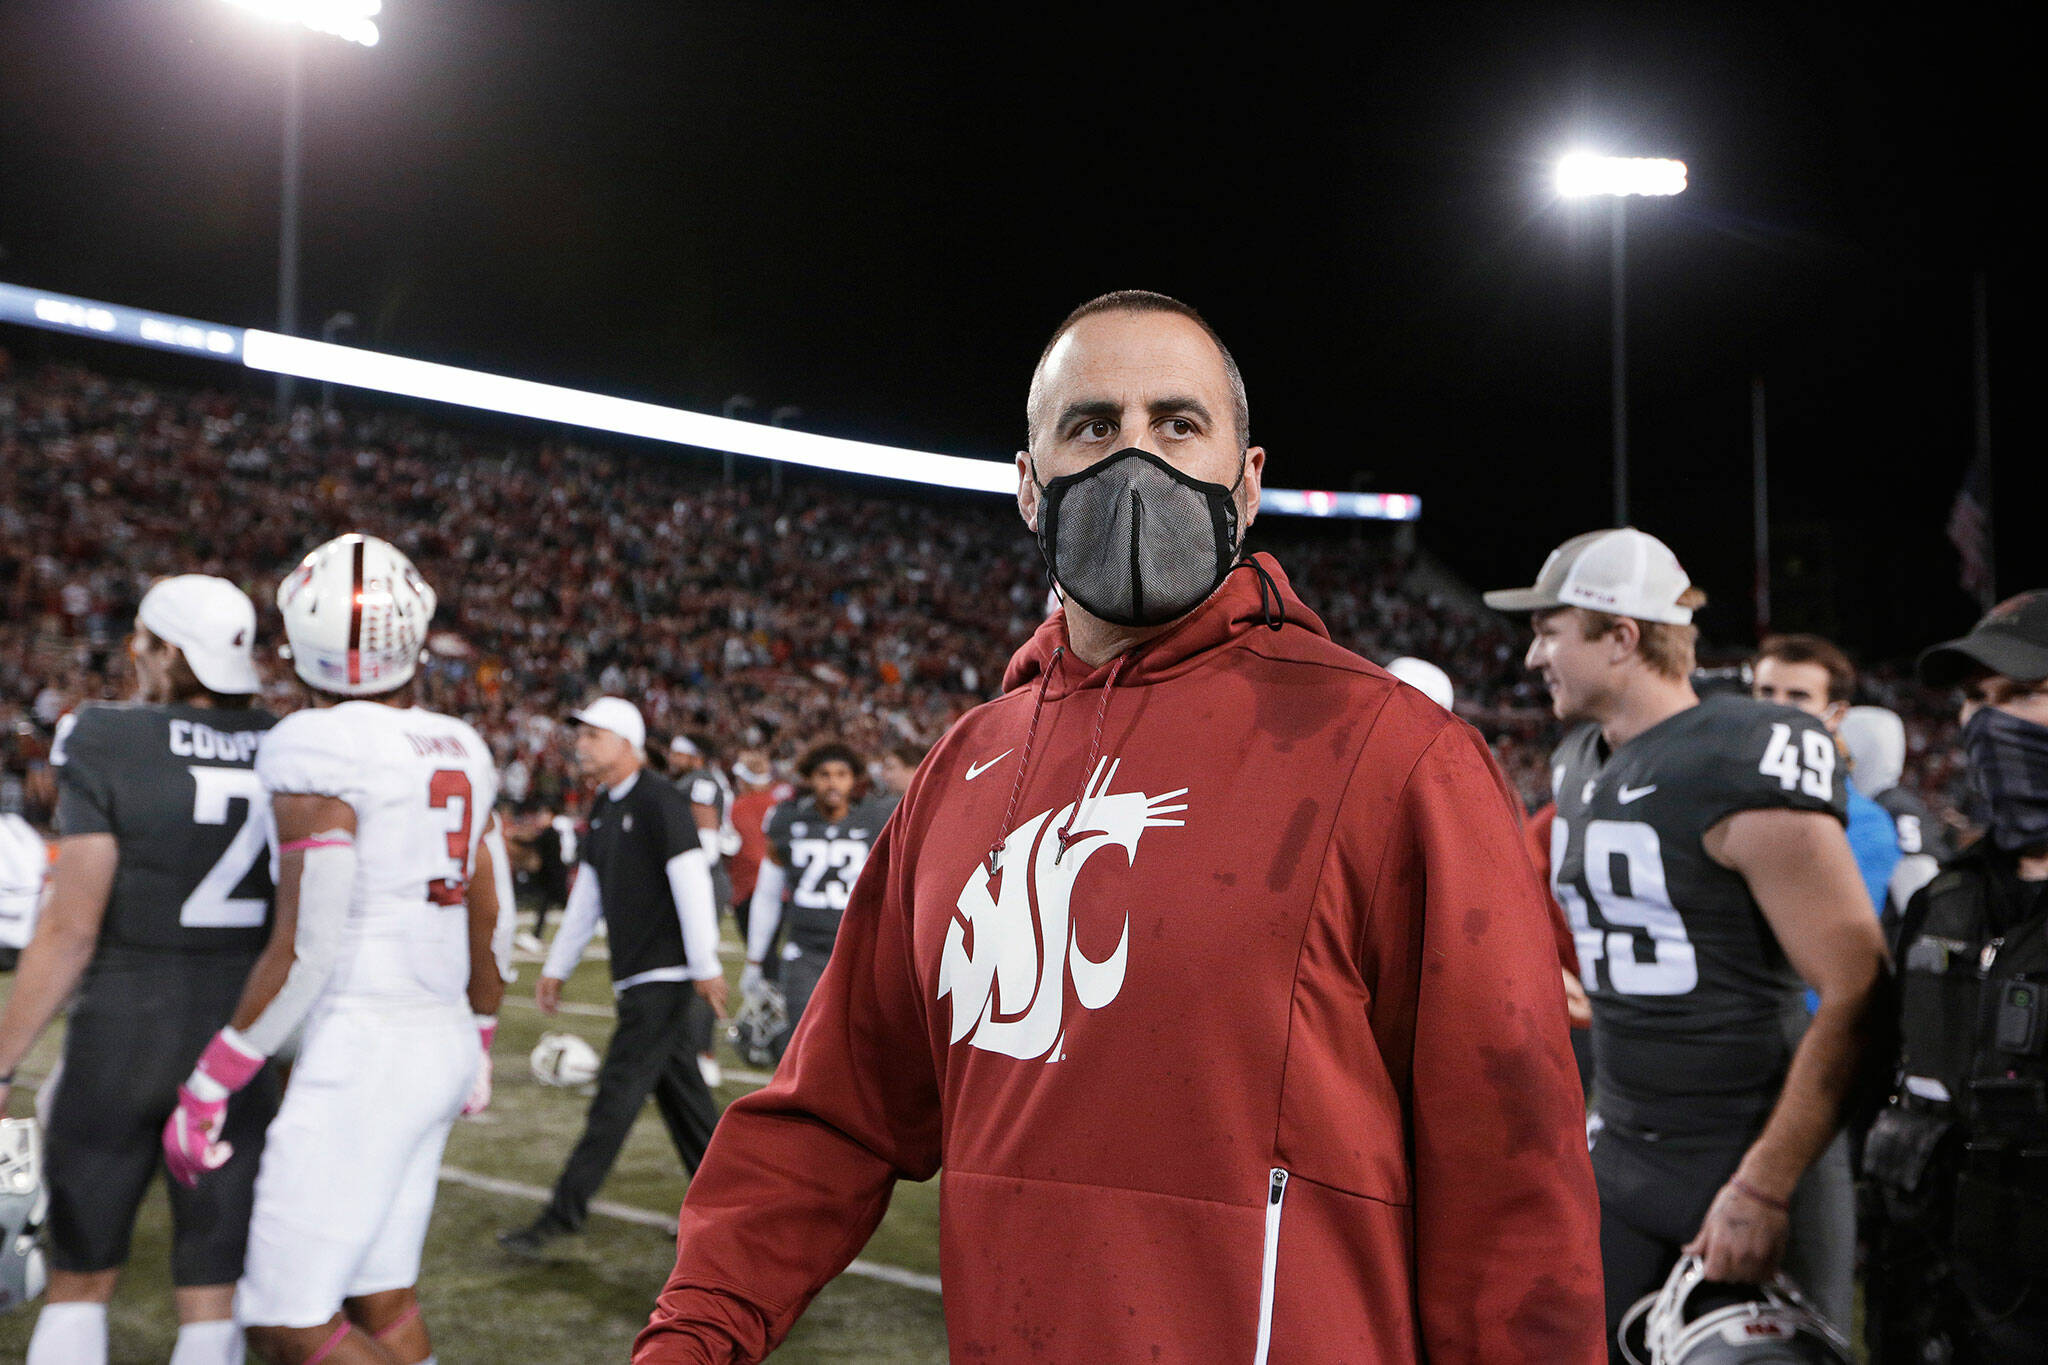 Former Washington State coach Nick Rolovich walks on the field after the team’s game against Stanford on Oct. 16, 2021, in Pullman. (AP Photo/Young Kwak)